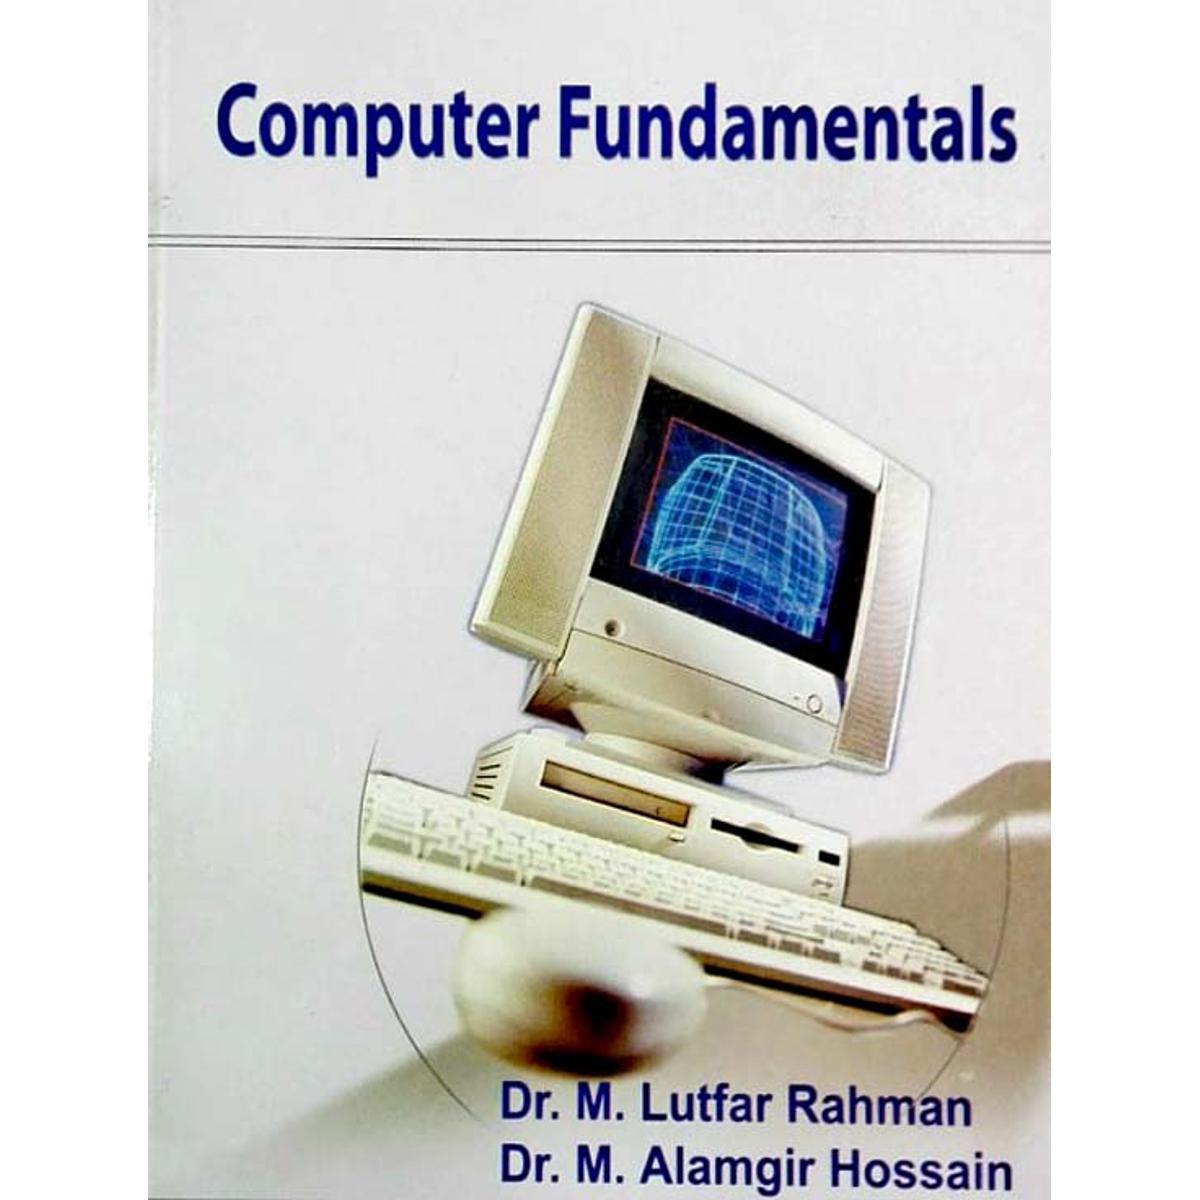 Computer Fundamentals - A Comprehensive Introduction to Computing - Provides a comprehensive overview